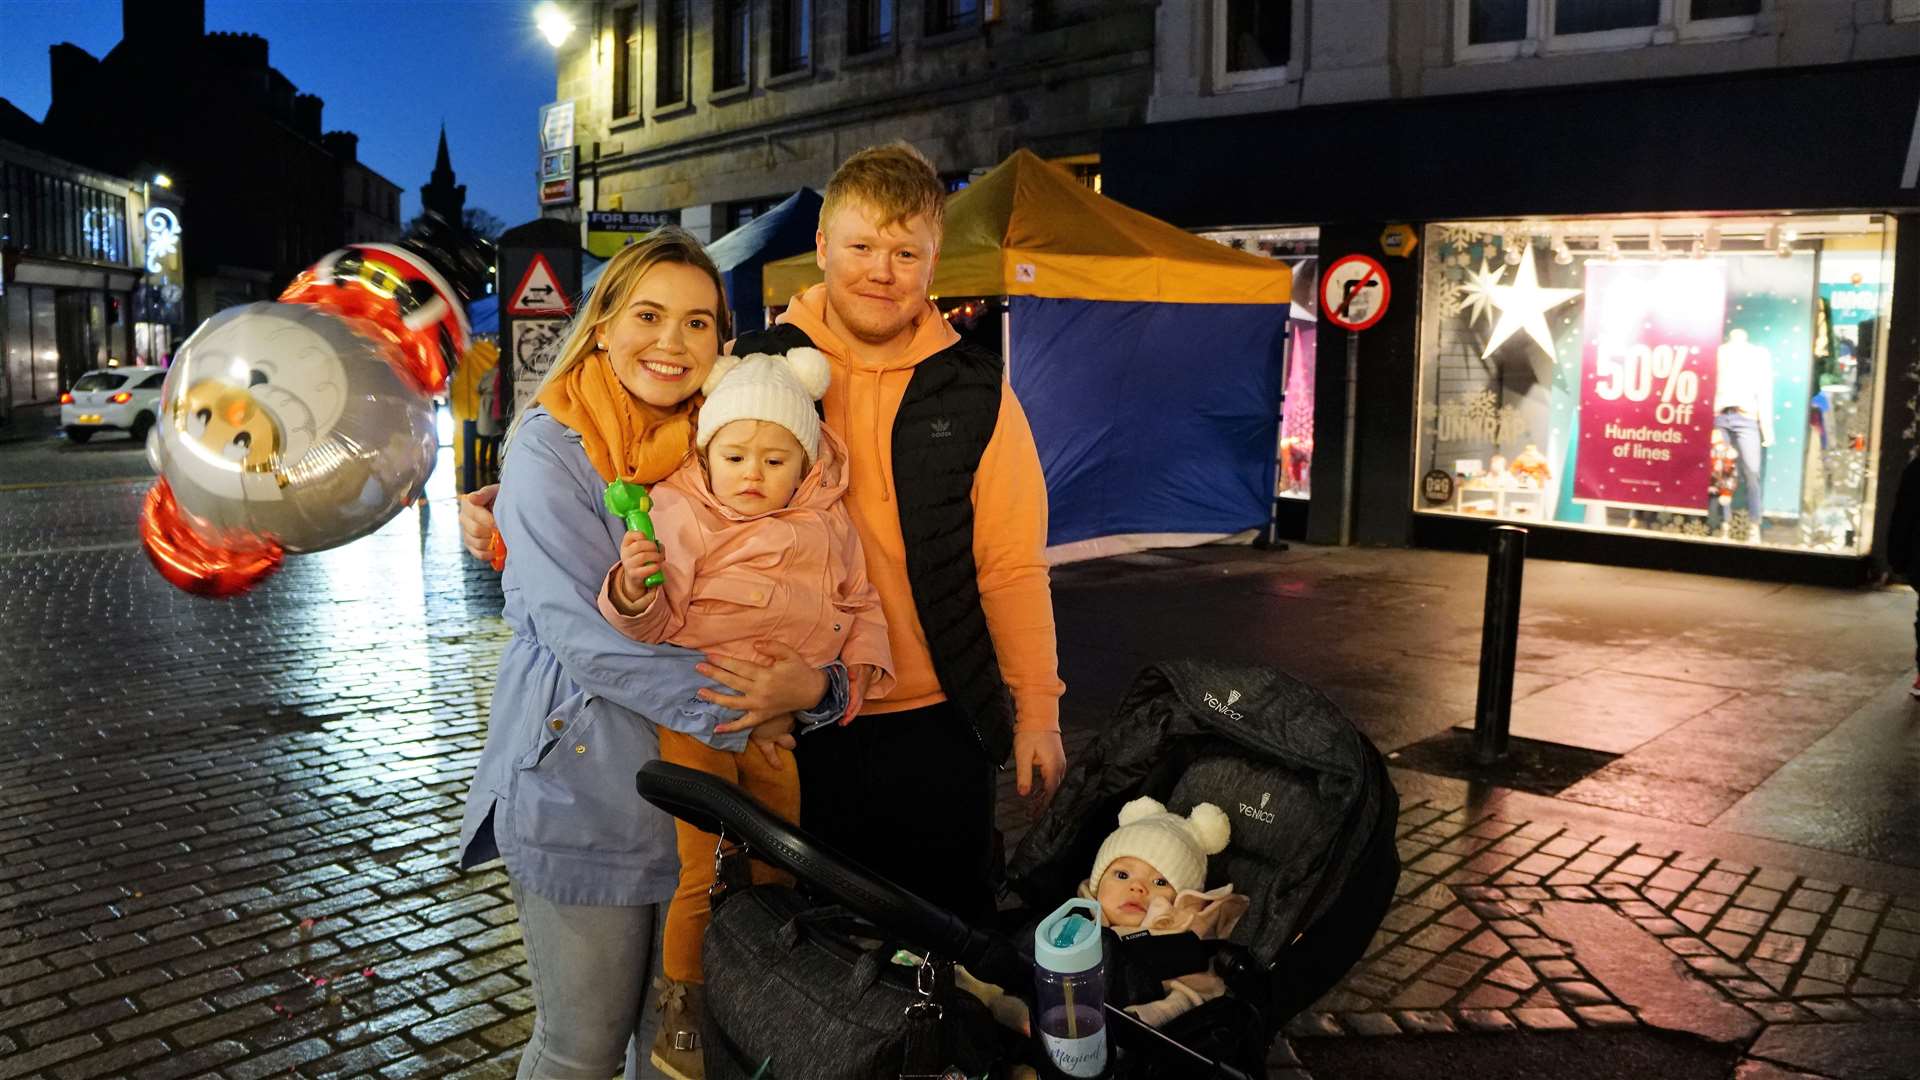 Zara Deas and Craig Manson with their children Evie and Callie. The couple said it was great to see the town centre vibrant again. Picture: DGS